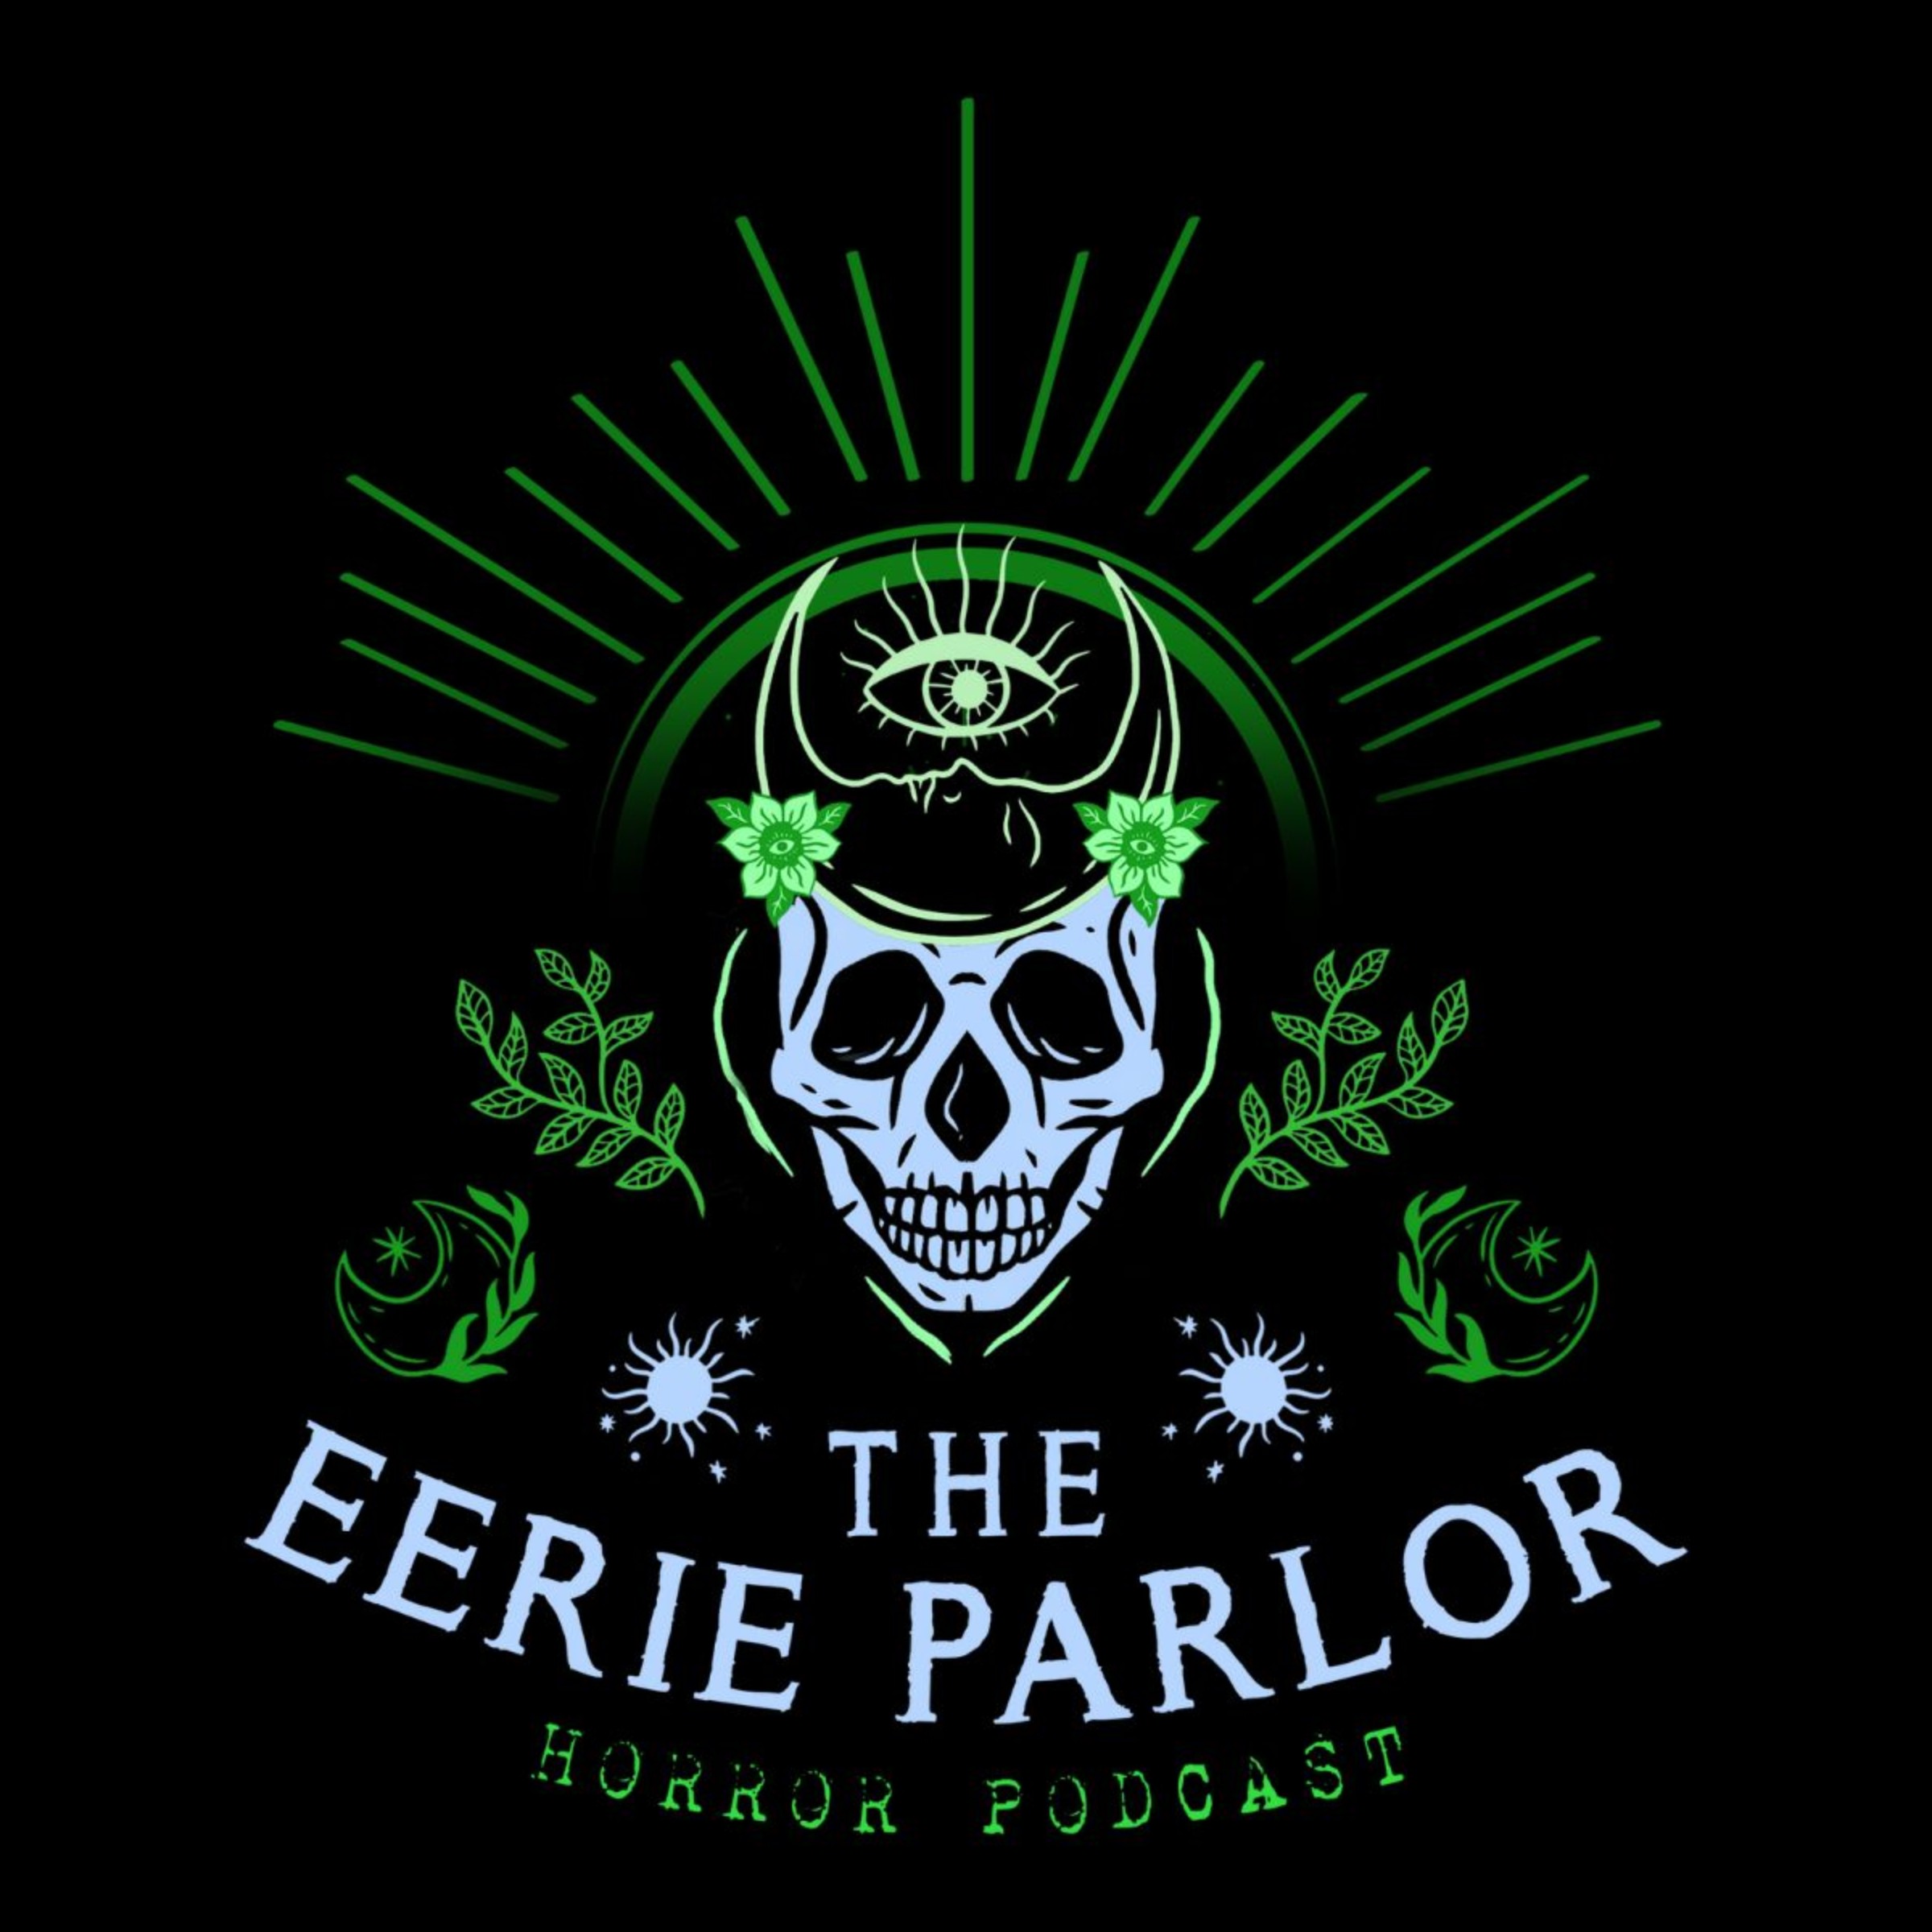 The Eerie Parlor